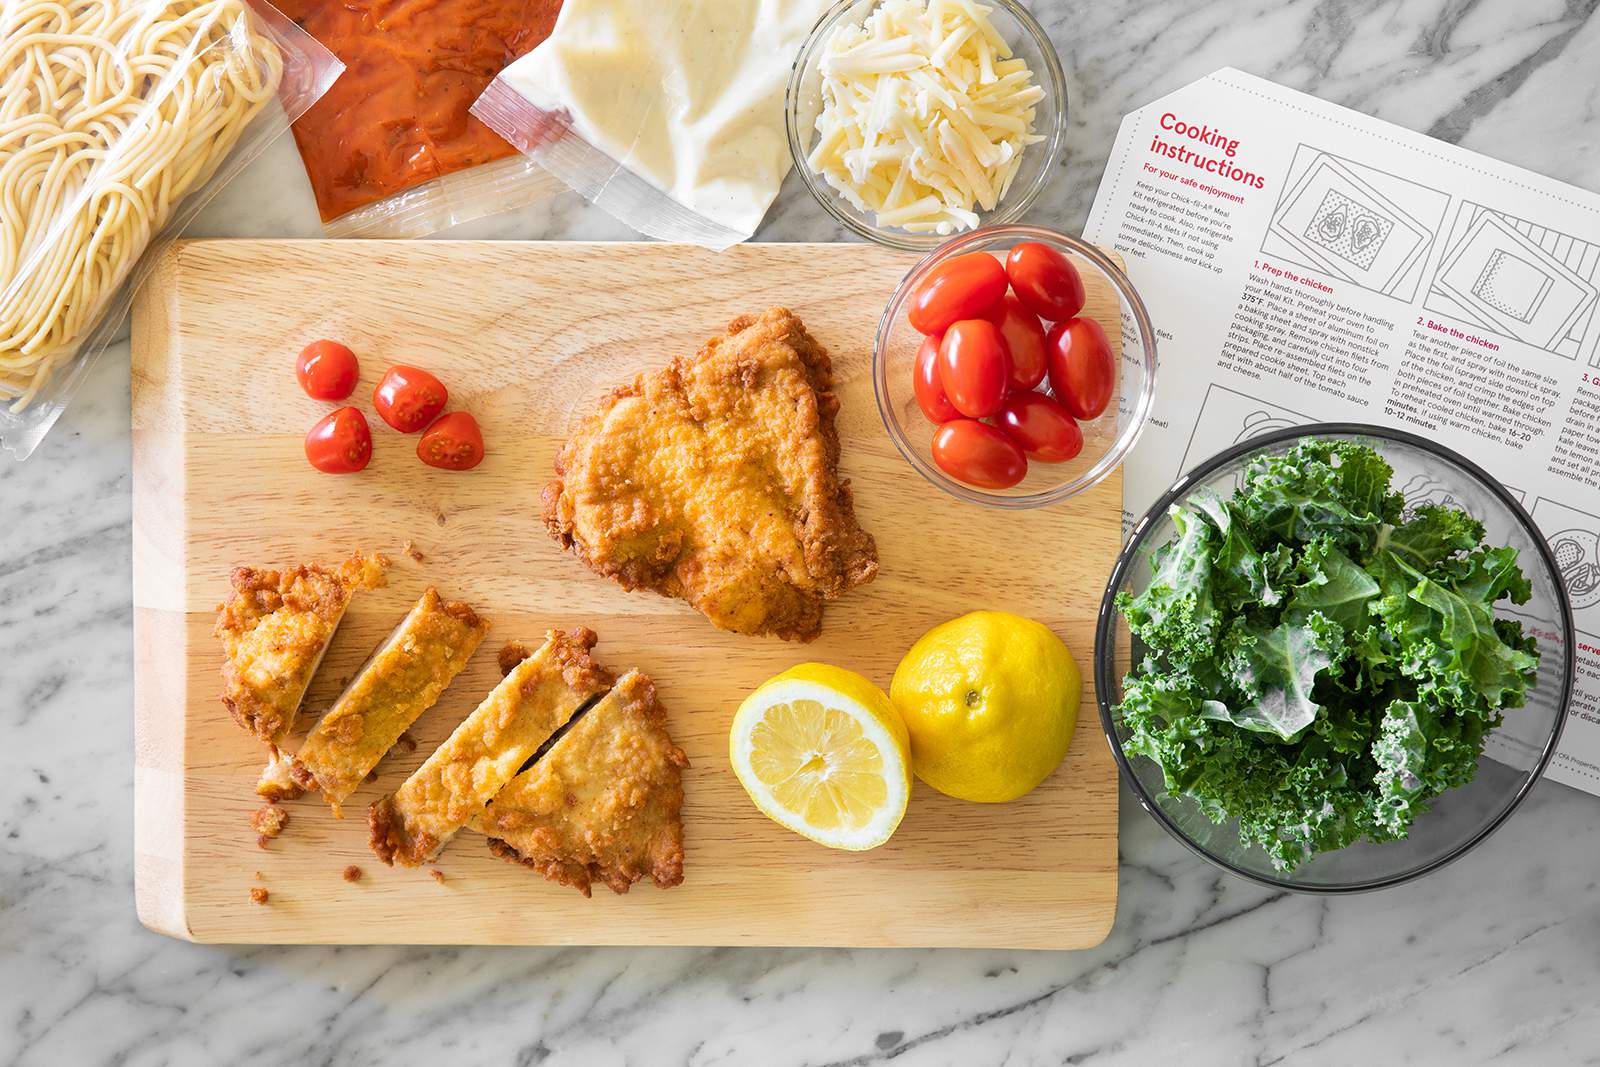 Chick-fil-A is launching a meal kit as more people eat at home